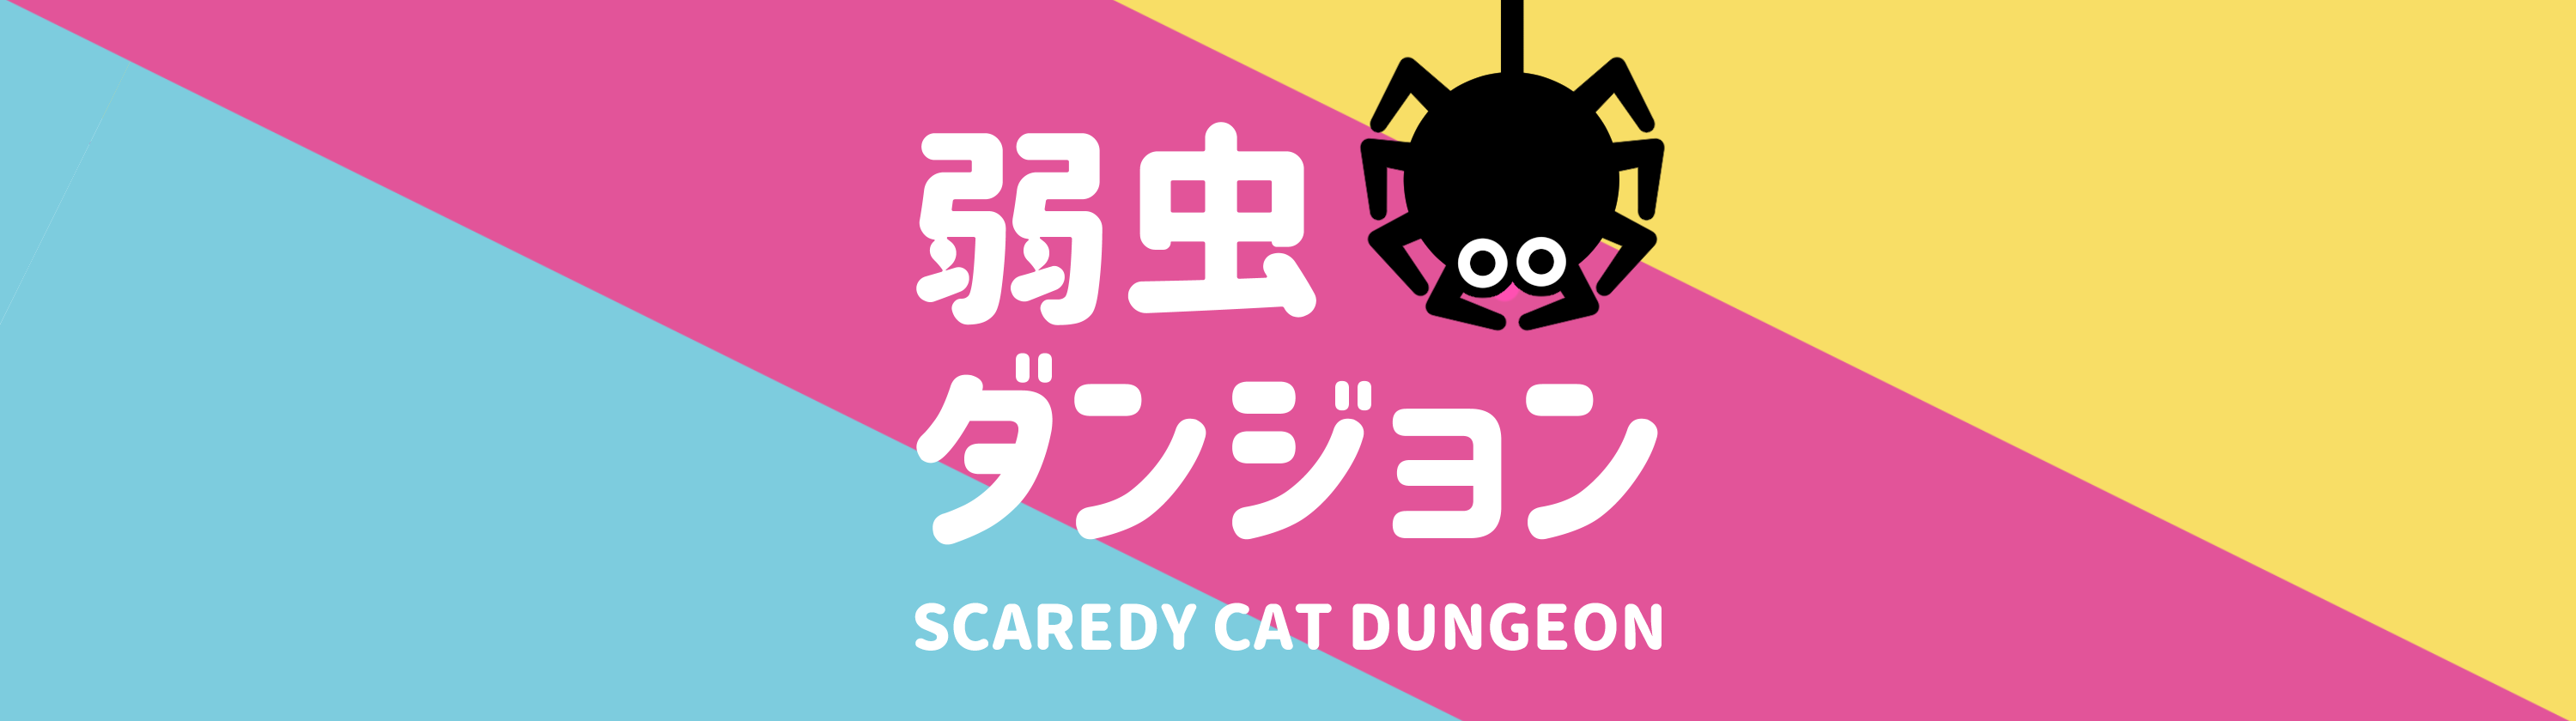 SCAREDY CAT DUNGEON